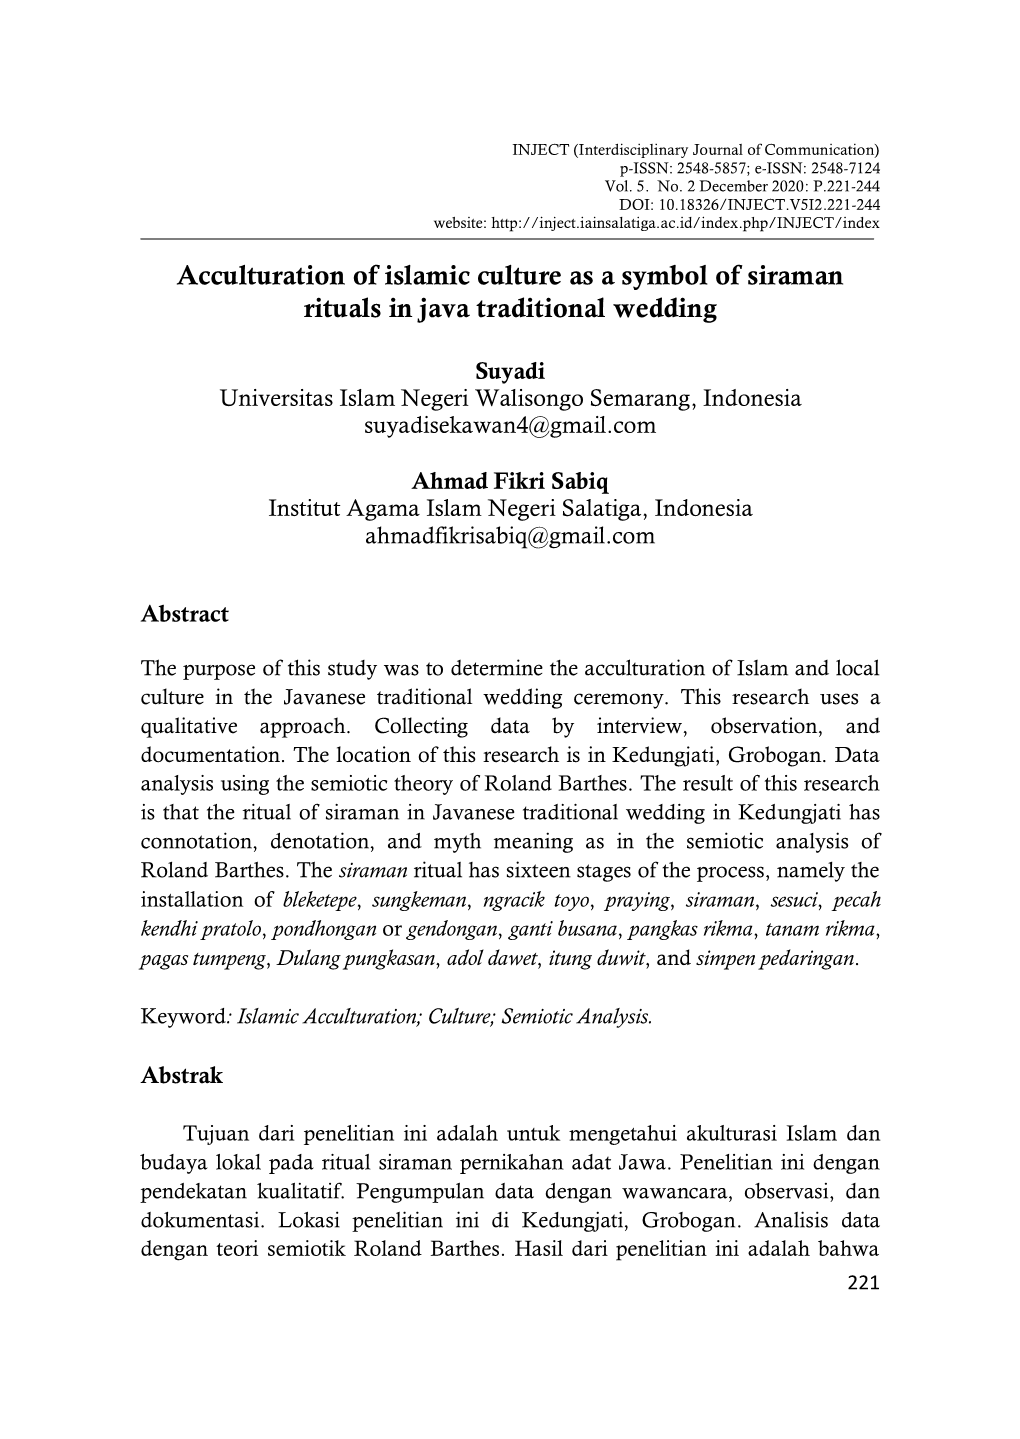 Acculturation of Islamic Culture As a Symbol of Siraman Rituals in Java Traditional Wedding